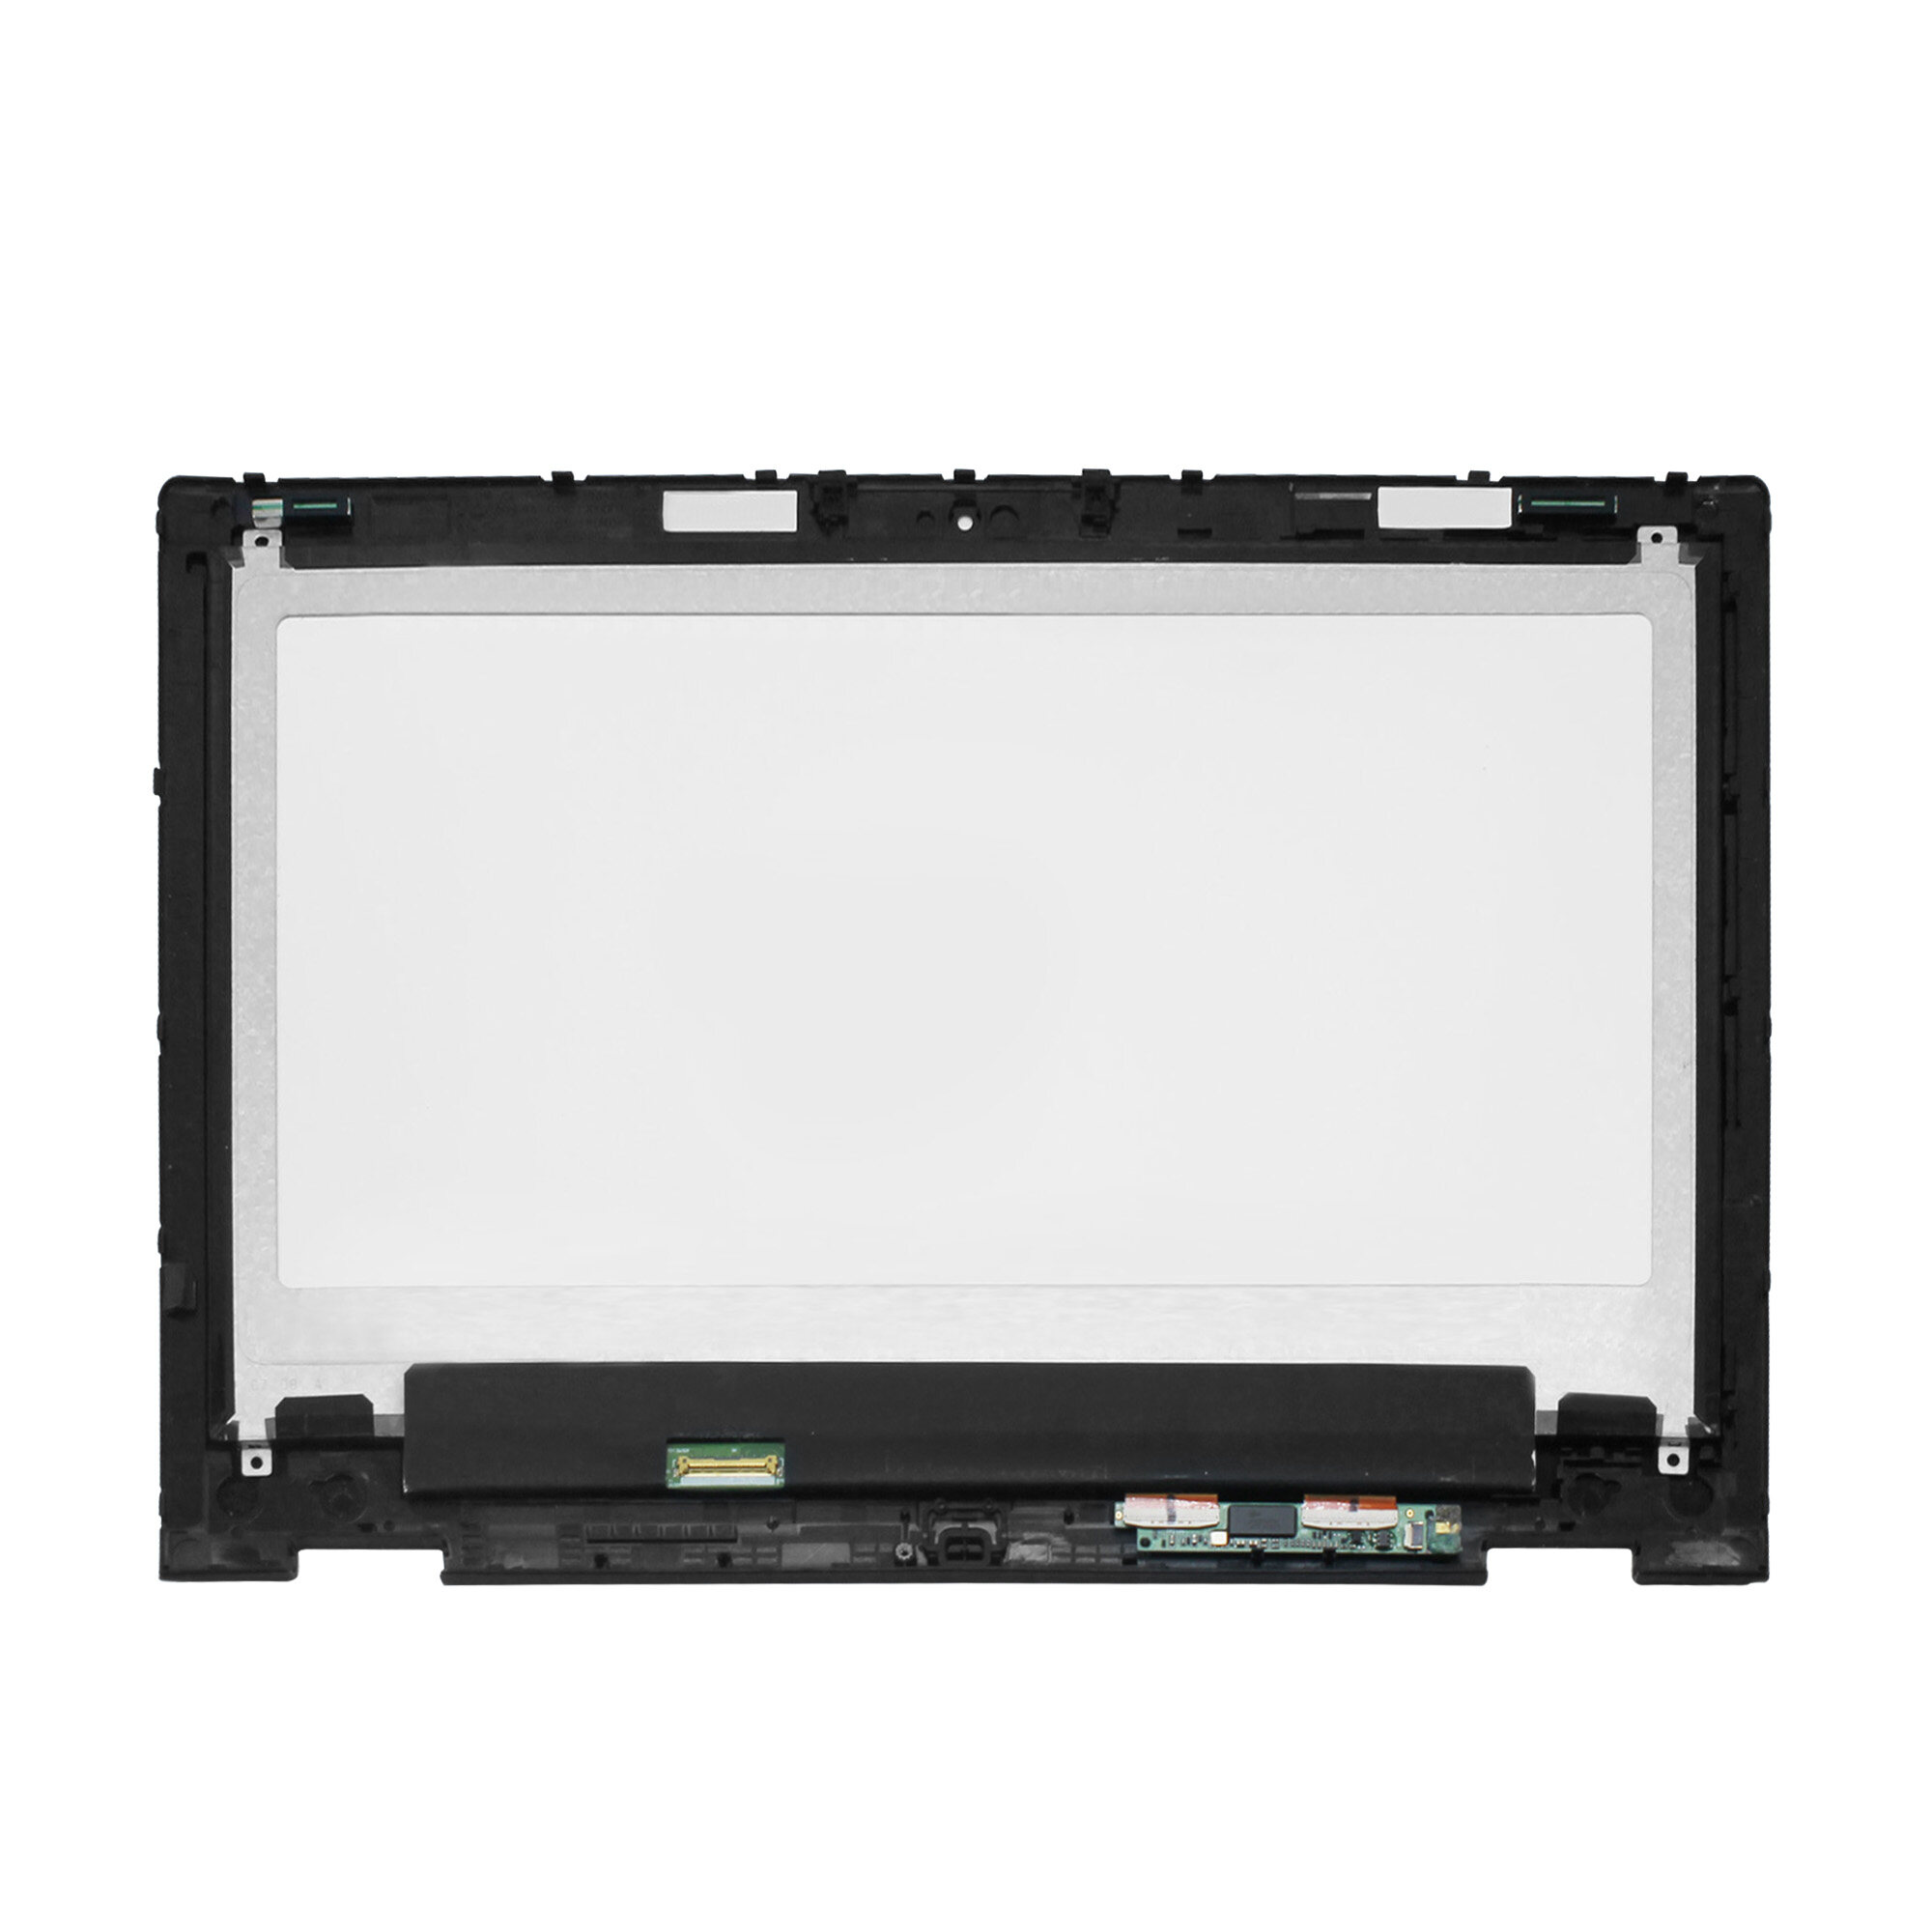 13.3'' FHD LCD Touch Screen Assembly + Bezel For DELL Inspiron 13 7352 7353